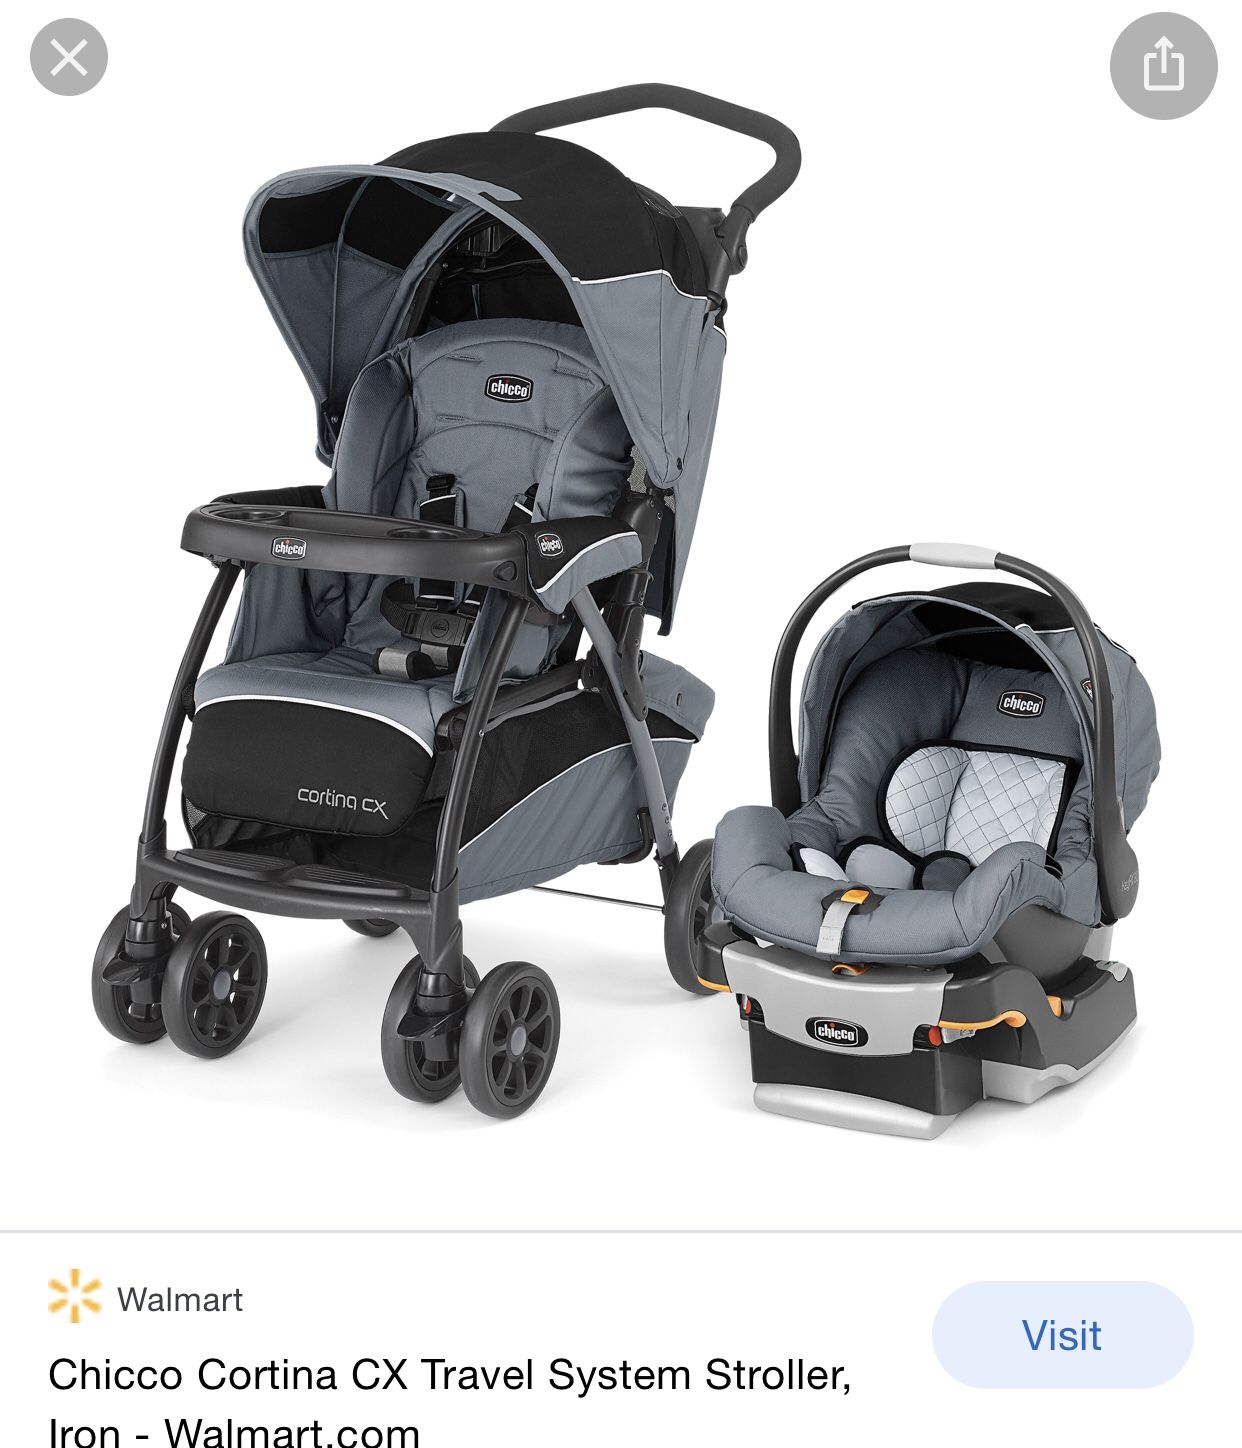 Stroller, car seat and base. Slightly used lass than 6 months. Our daughter out grew it. Retails for $299.99 new.